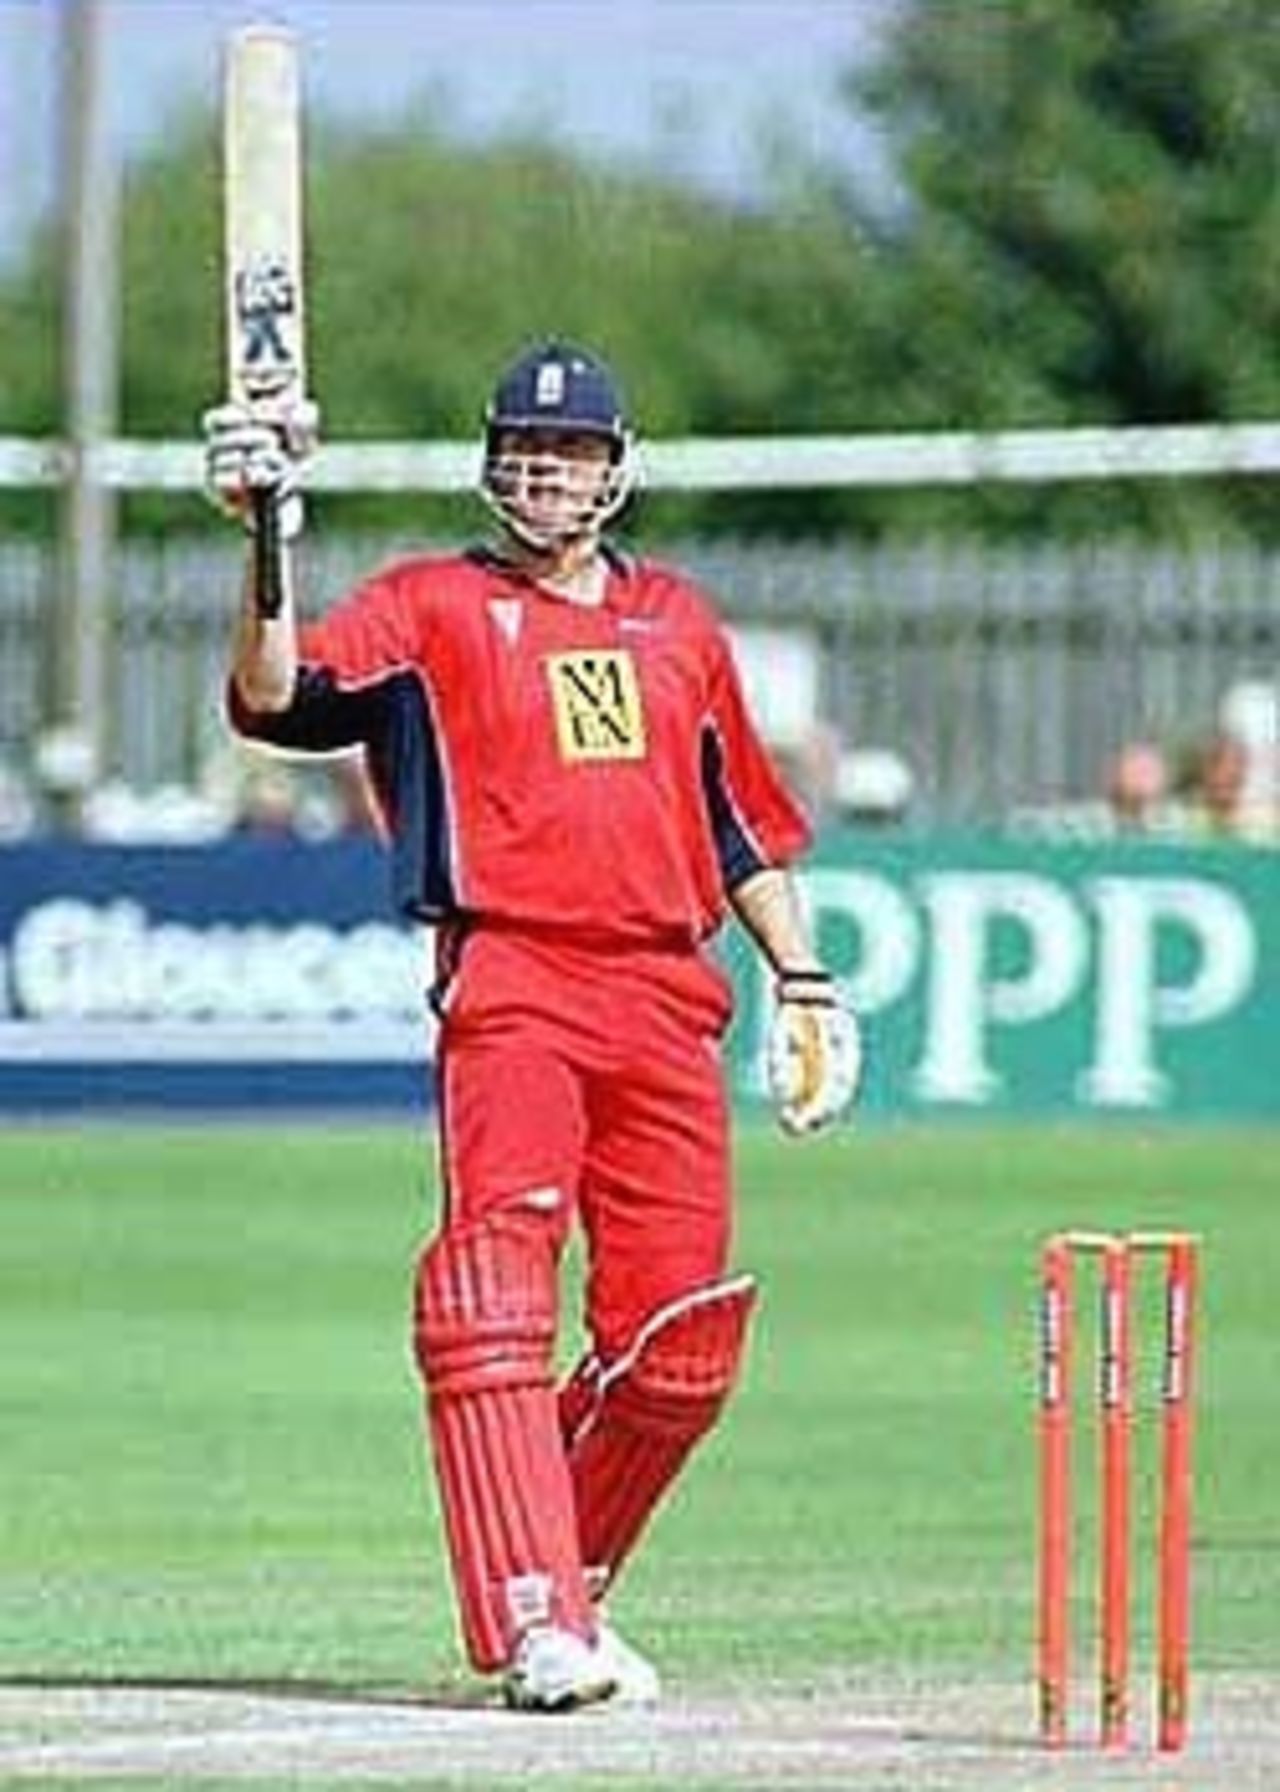 Hard hitting Andrew Flintoff signals for a new bat, National League Division One, 2000, Gloucestershire v Lancashire, The Royal & Sun Alliance County Ground, Bristol, 4 September 2000.